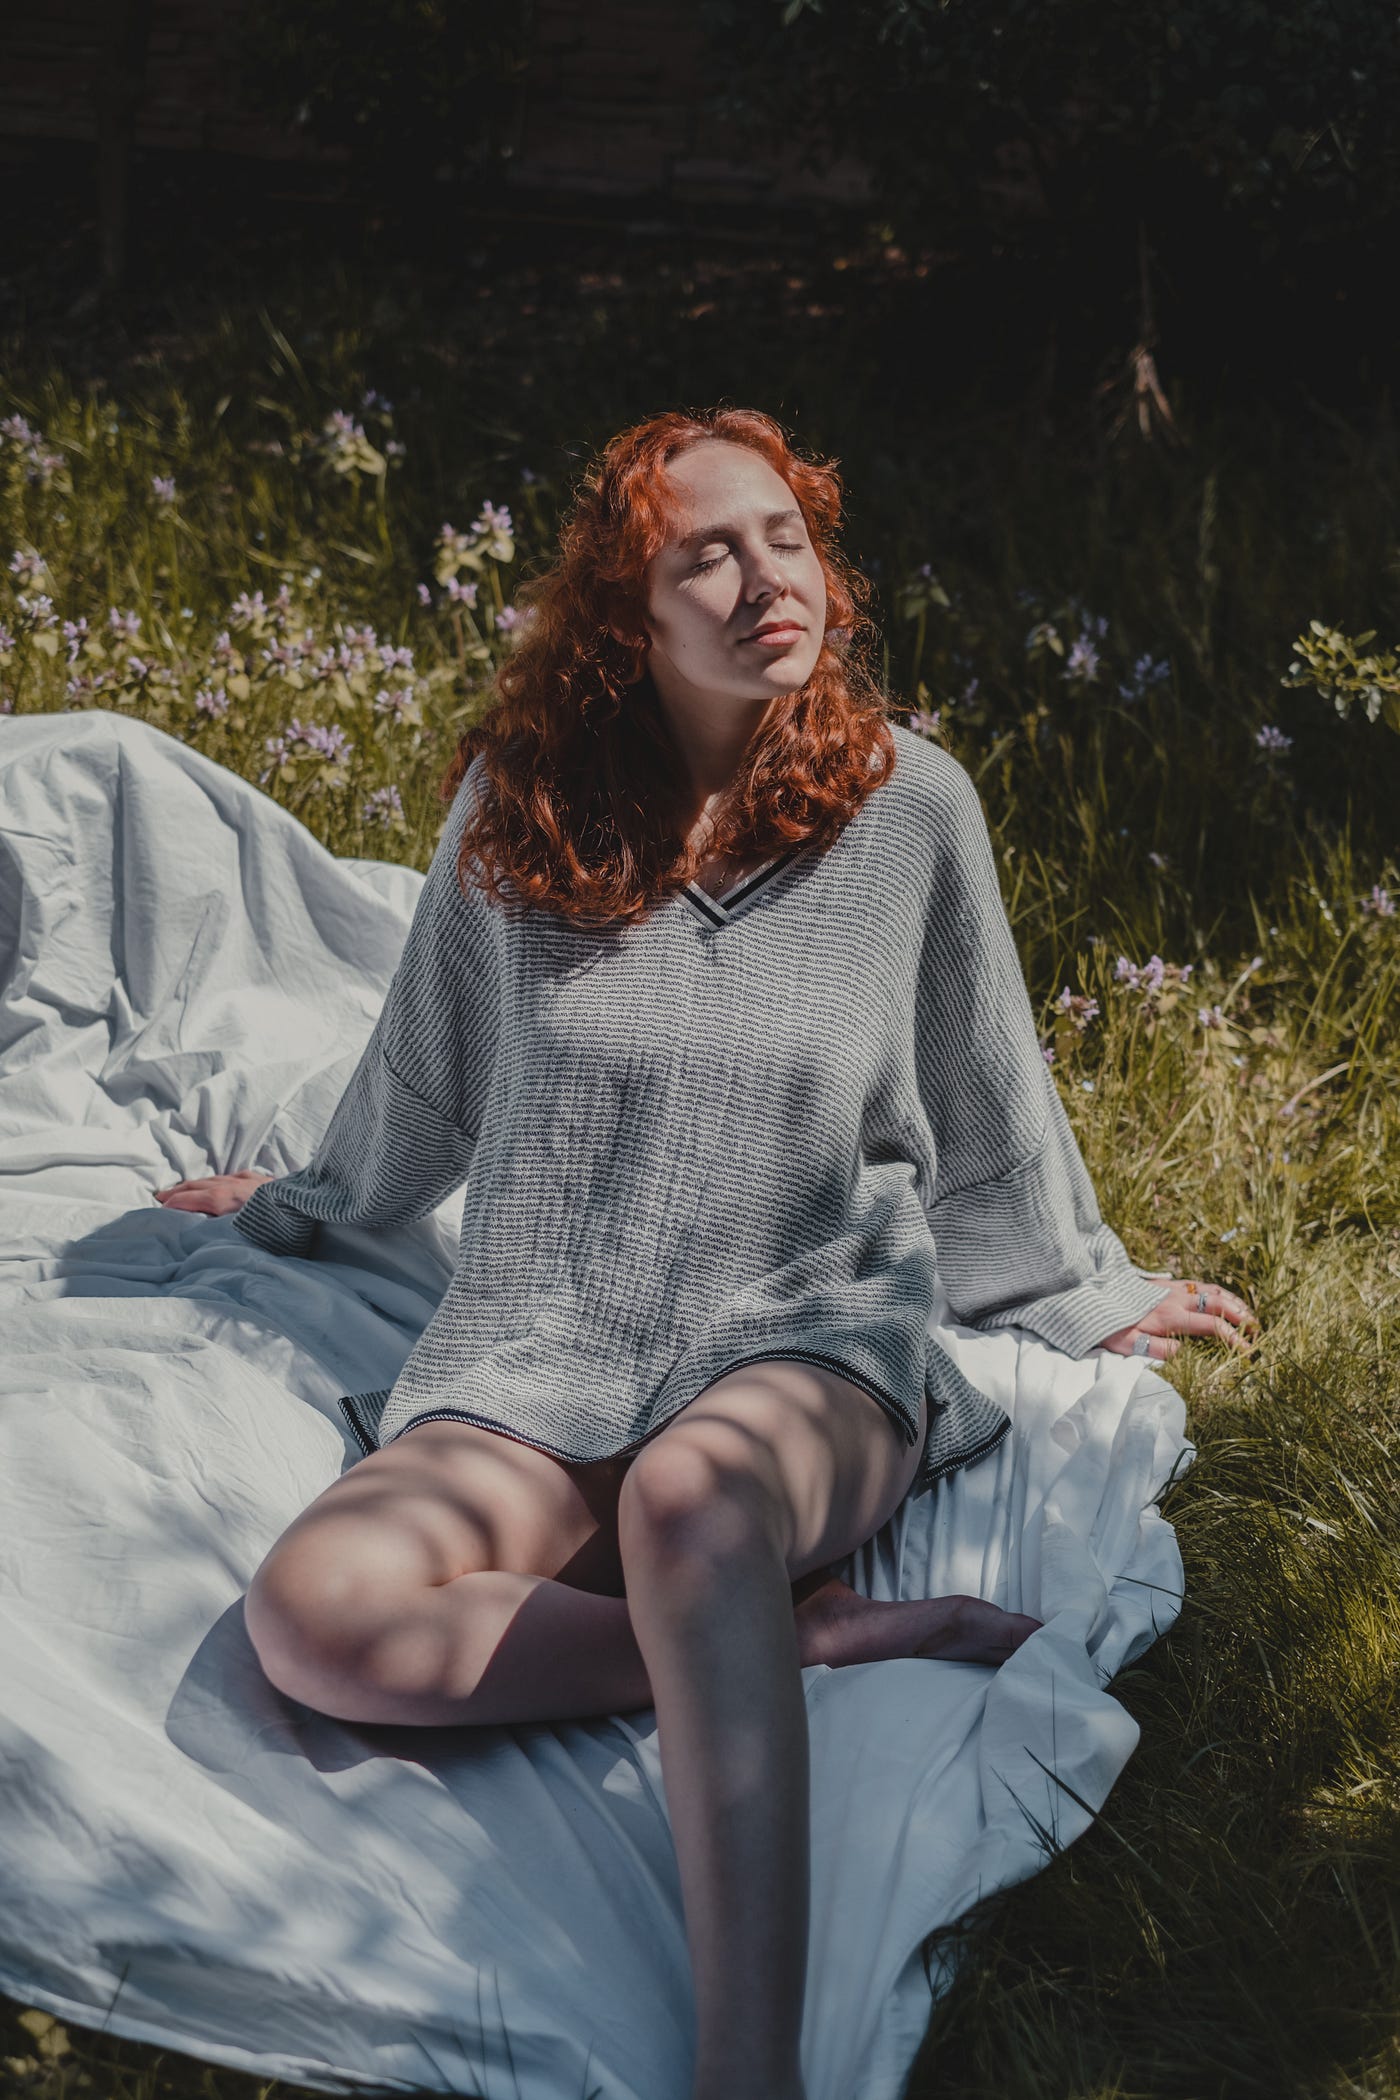 A ginger woman soaking in sunlight sitting on grass